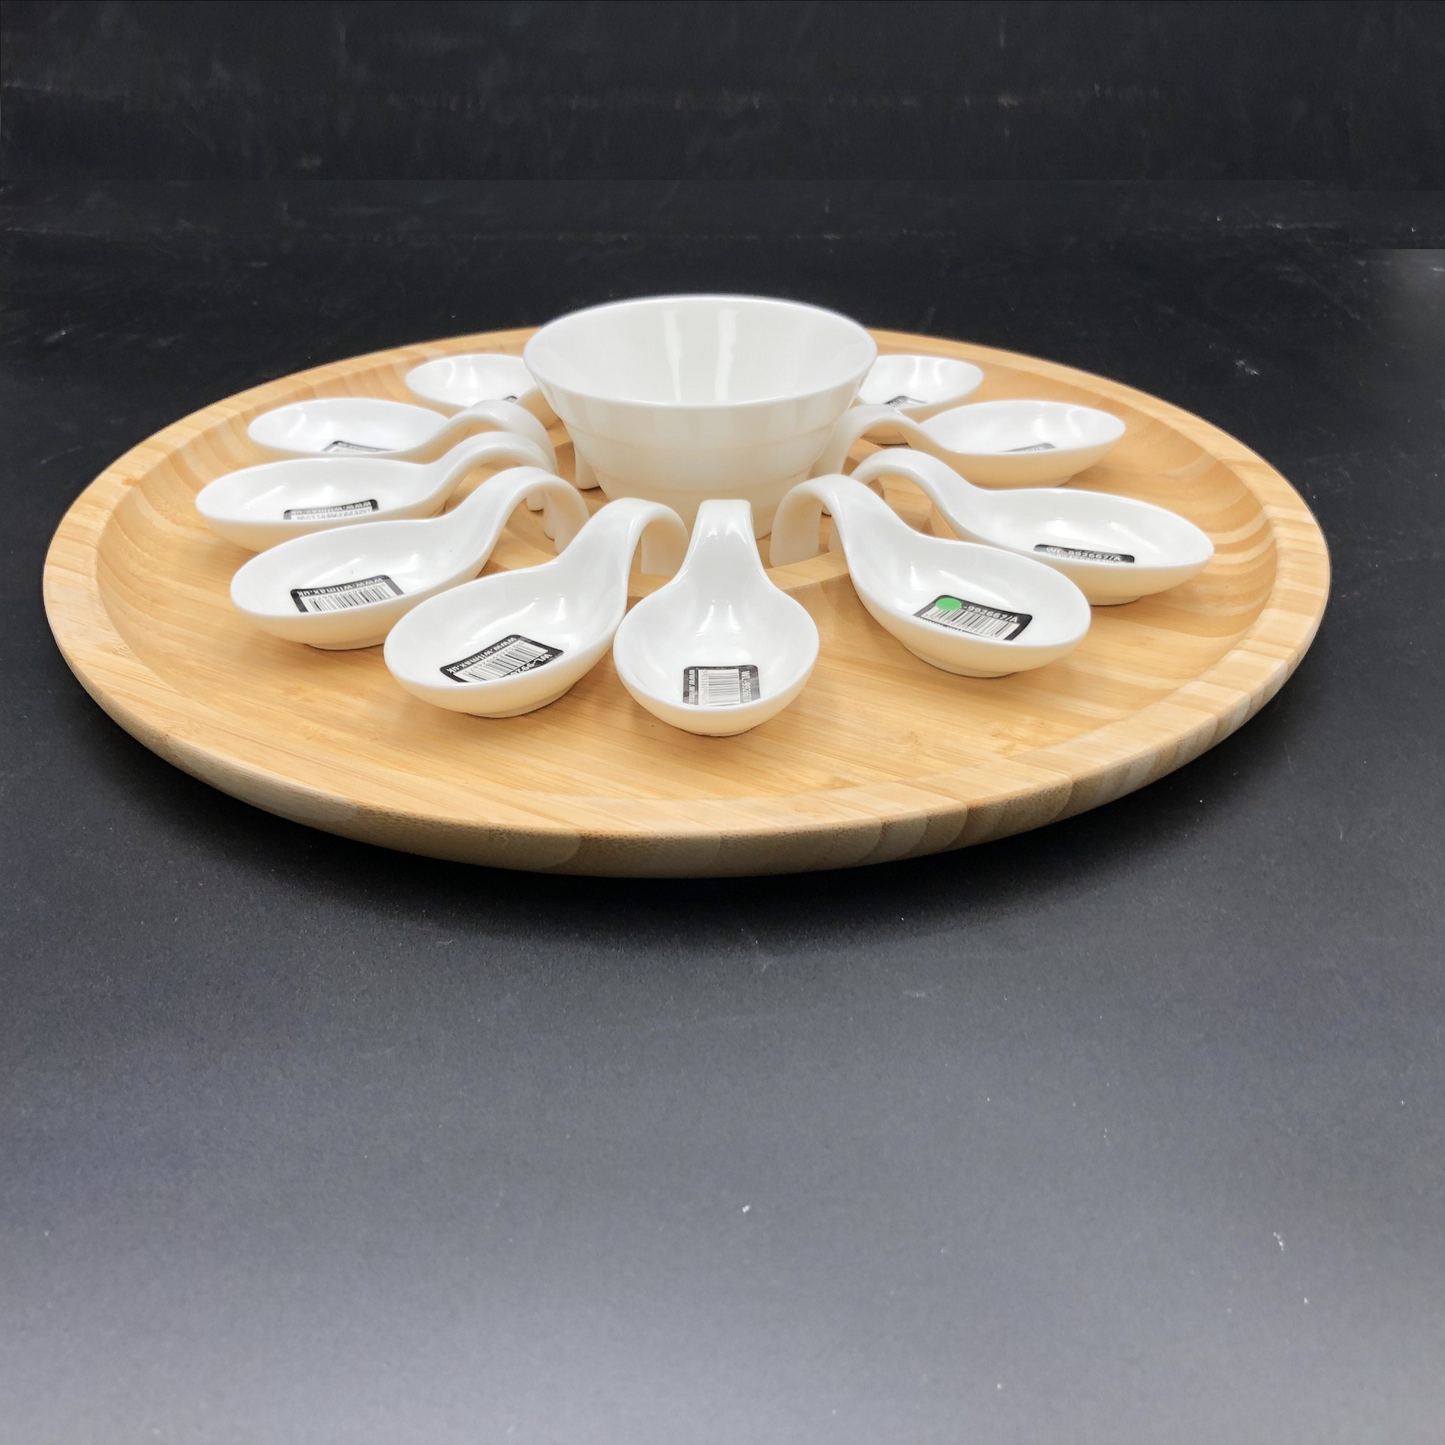 Wilmax Large Party Serving Tray With 12 Shooter Spoons And Condiments Dish For The Center WL-555015